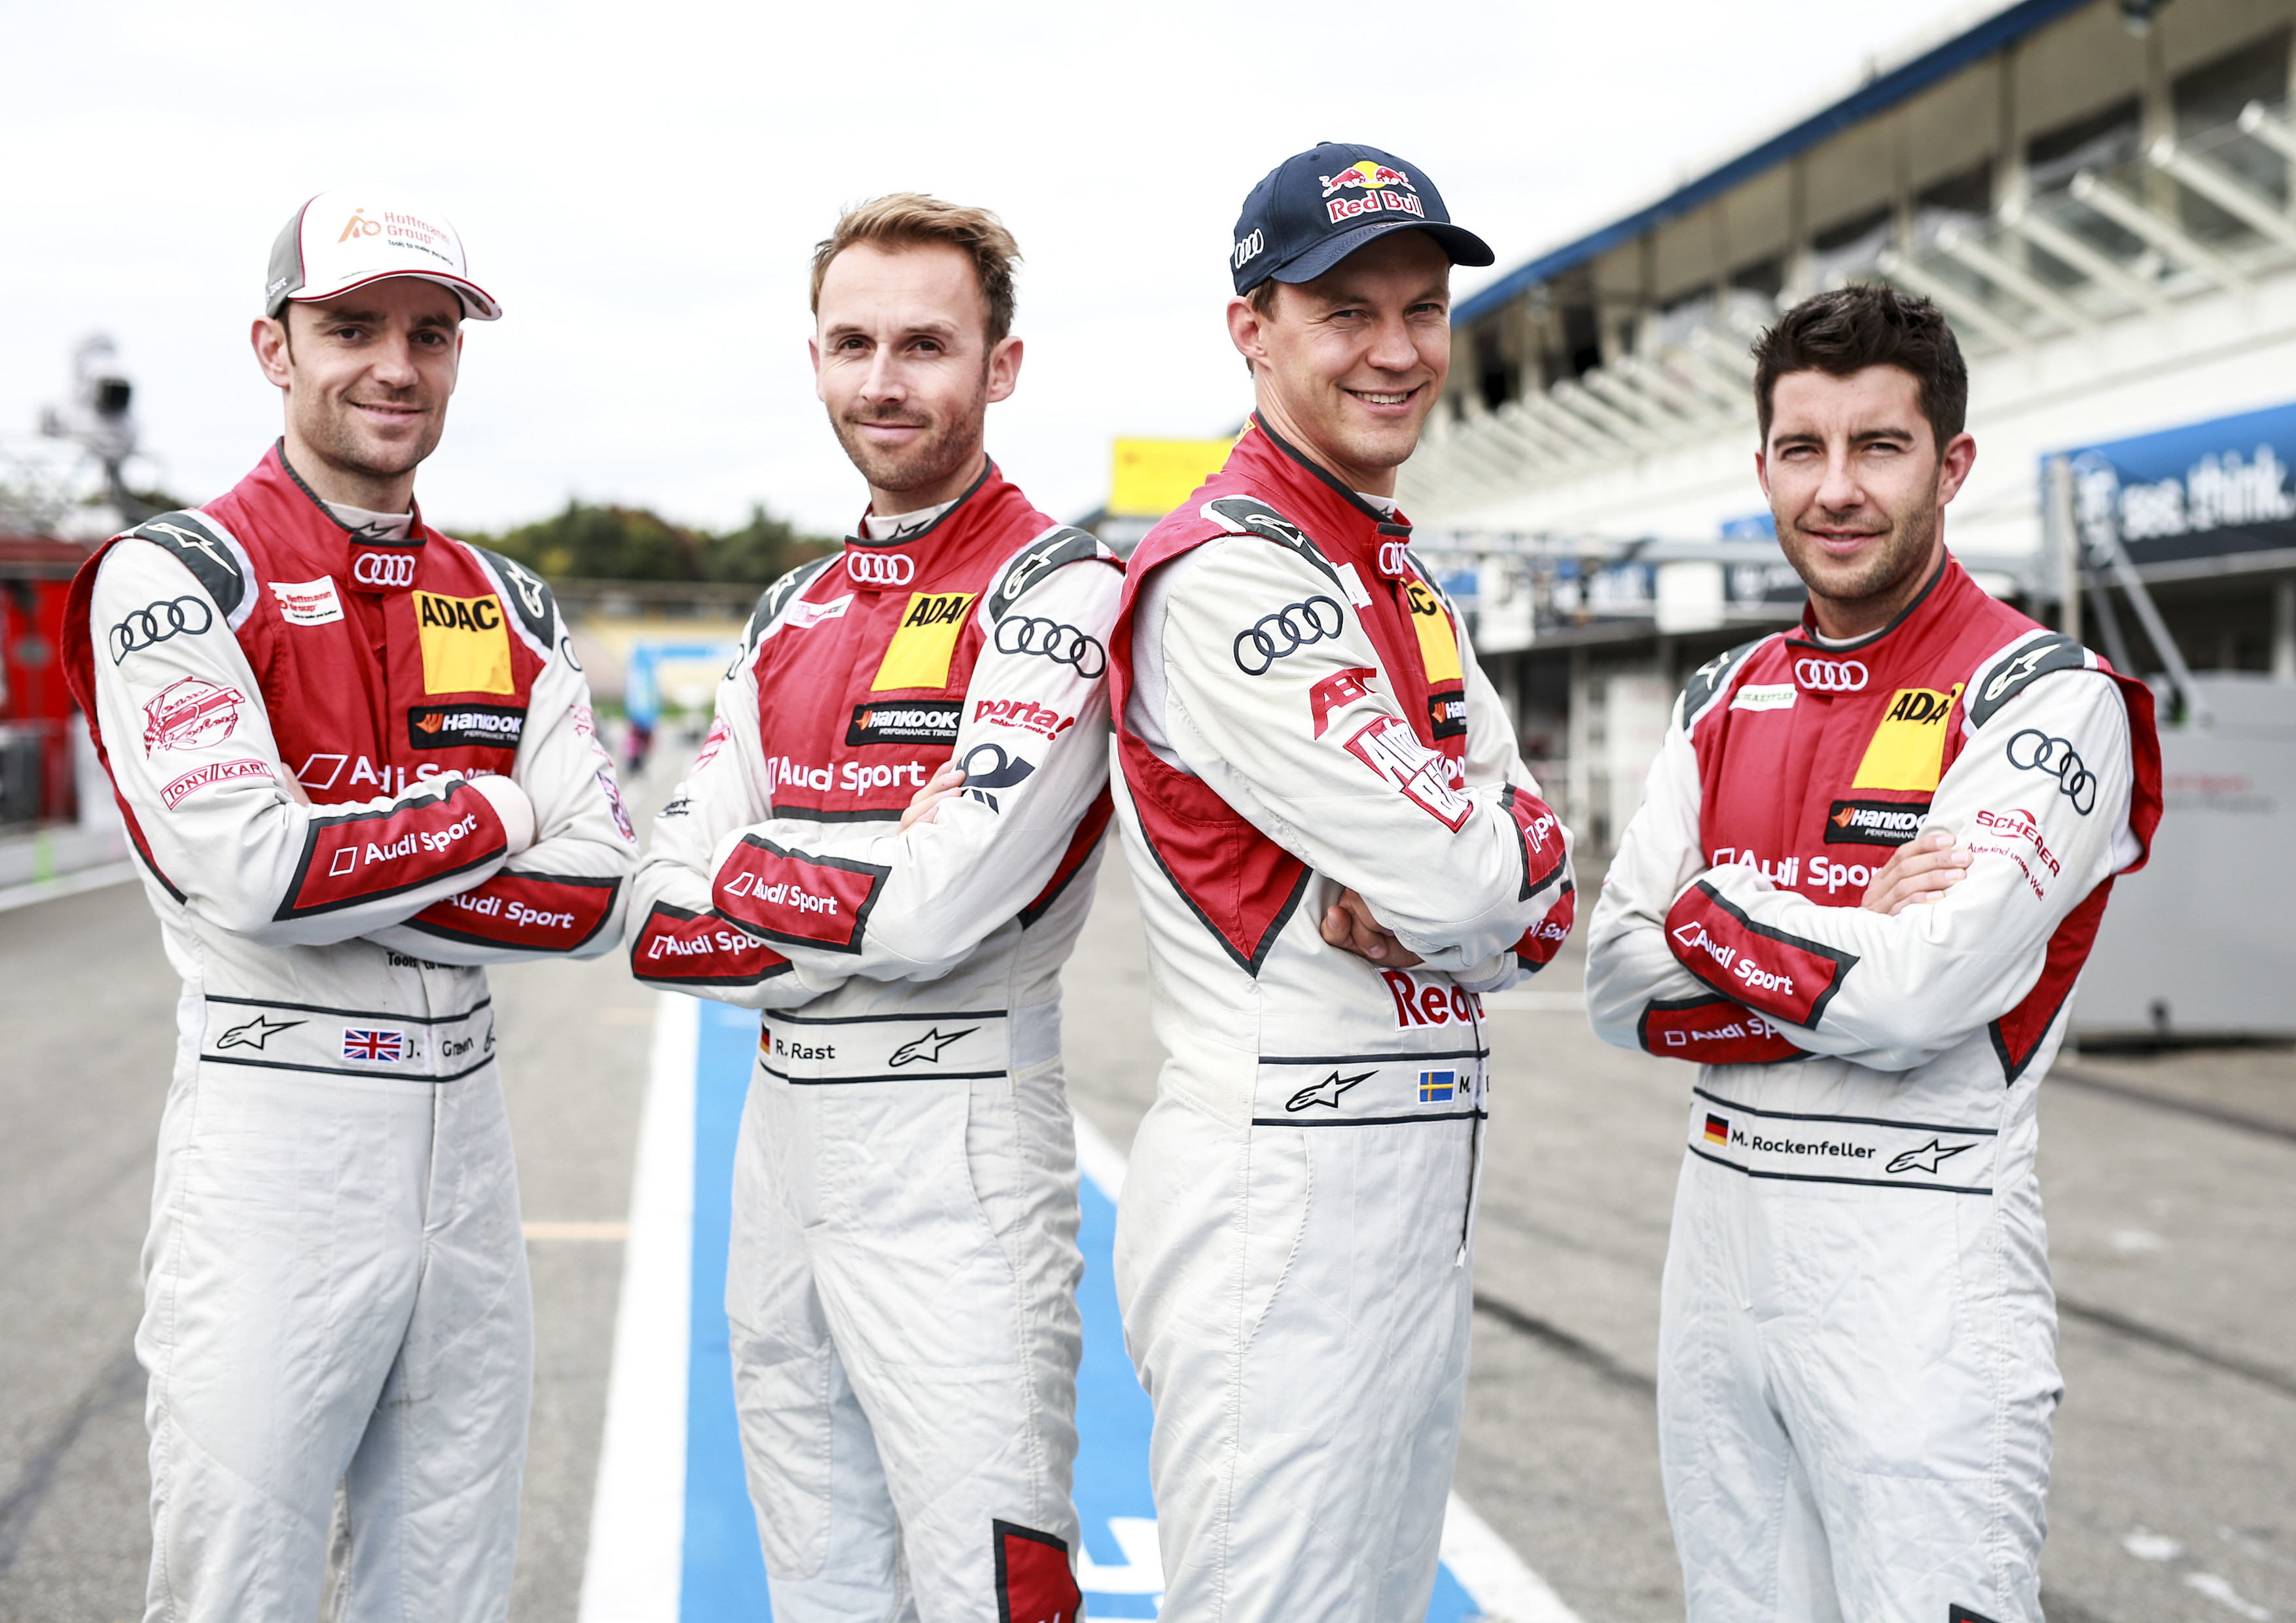 Perfect “triple”: Audi claims all three DTM titles